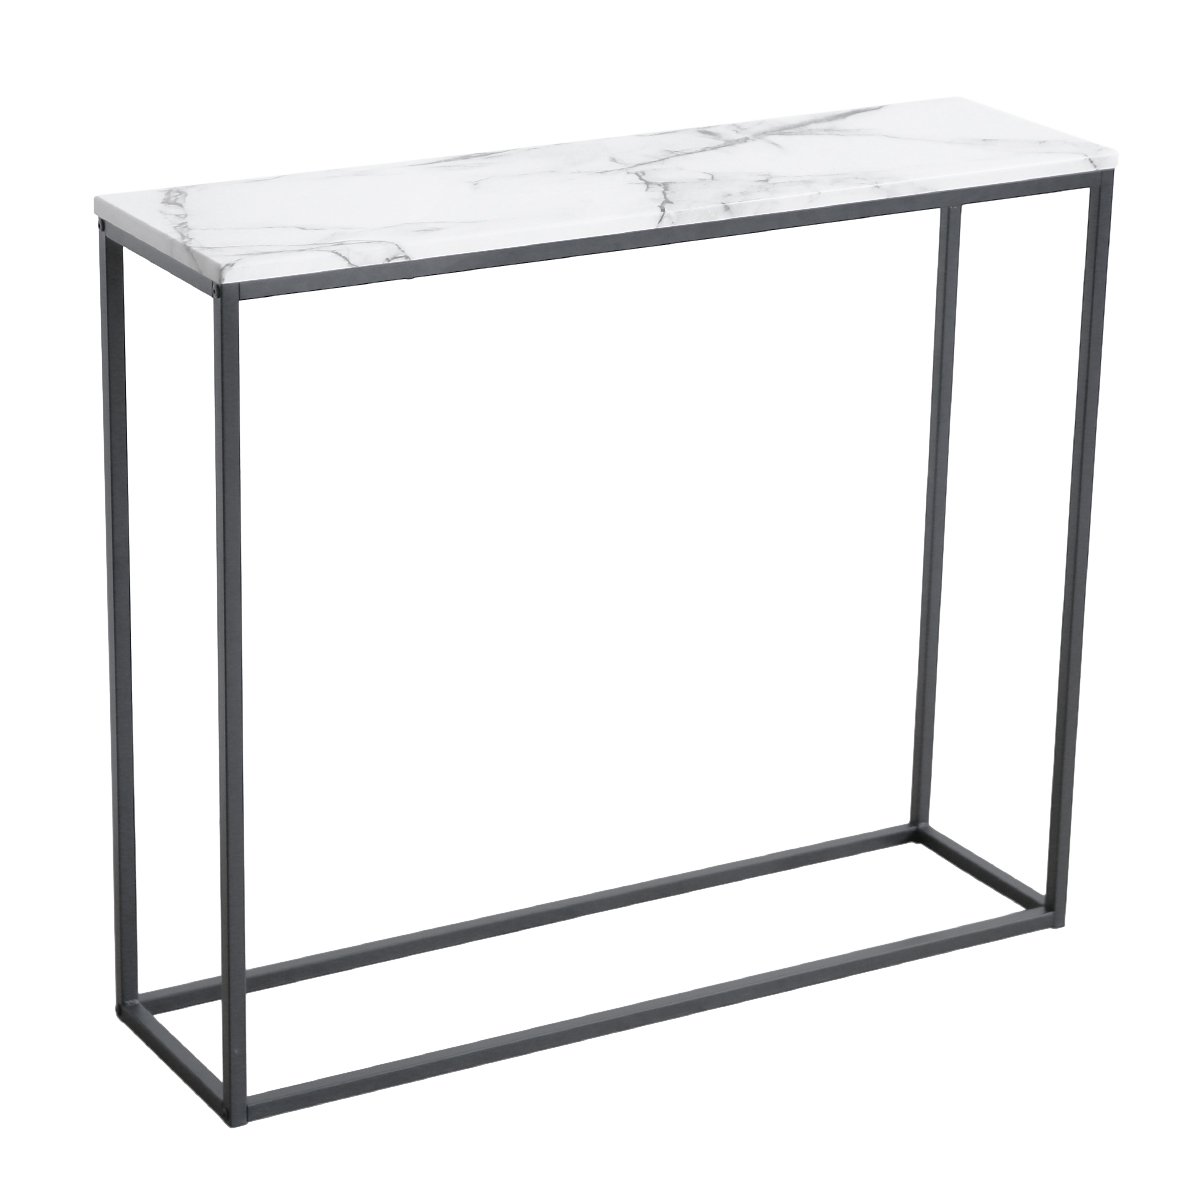 roomfitters sofa console table marble print top metal chrome glass accent with shelf frame white narrow foyer hall kitchen dining cupboard decoration round counter height black